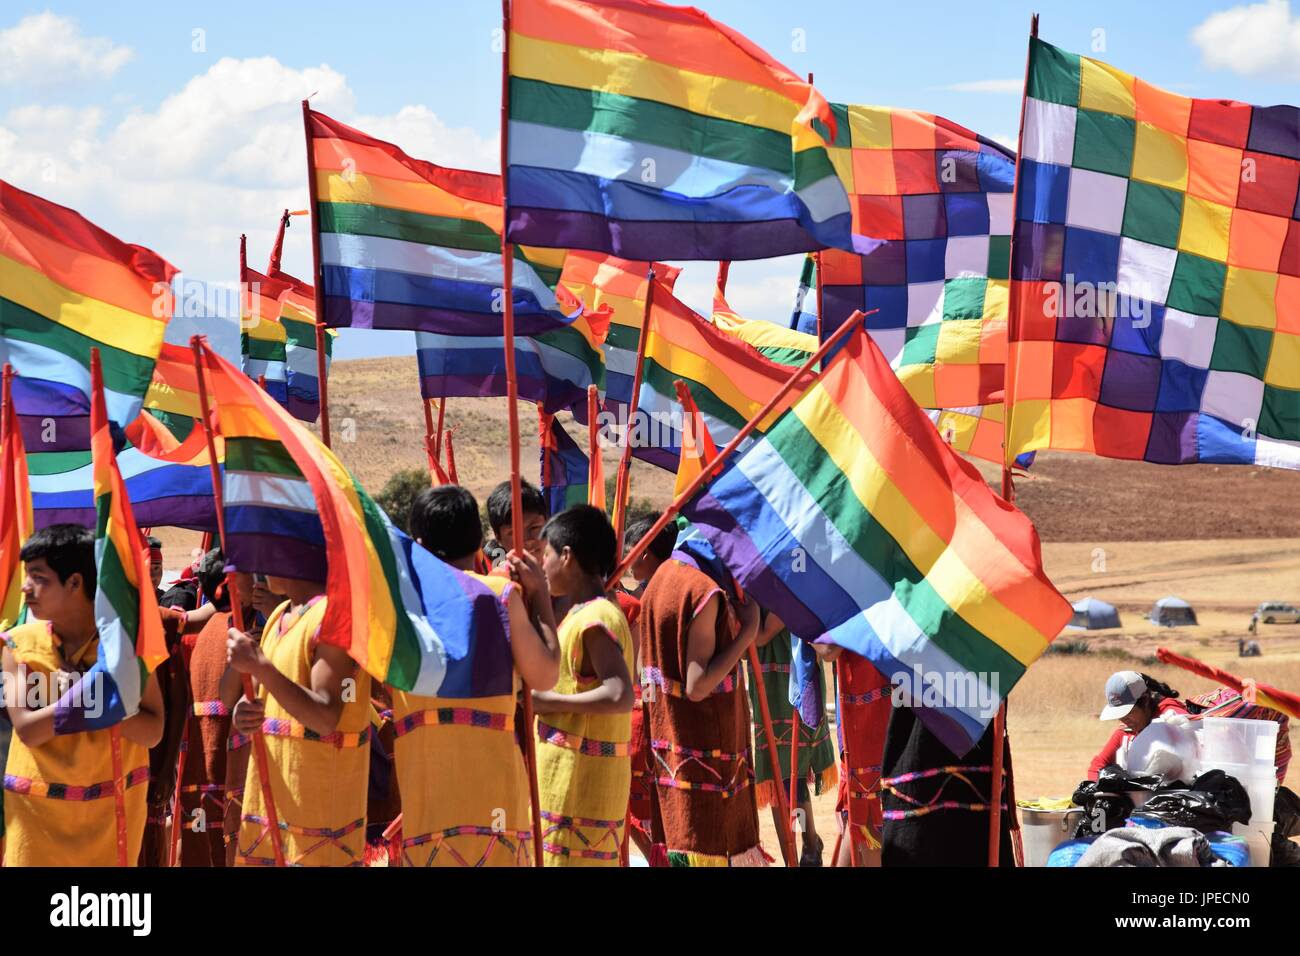 Parade participants in colorful traditional clothing get ready to perform in Peru Stock Photo